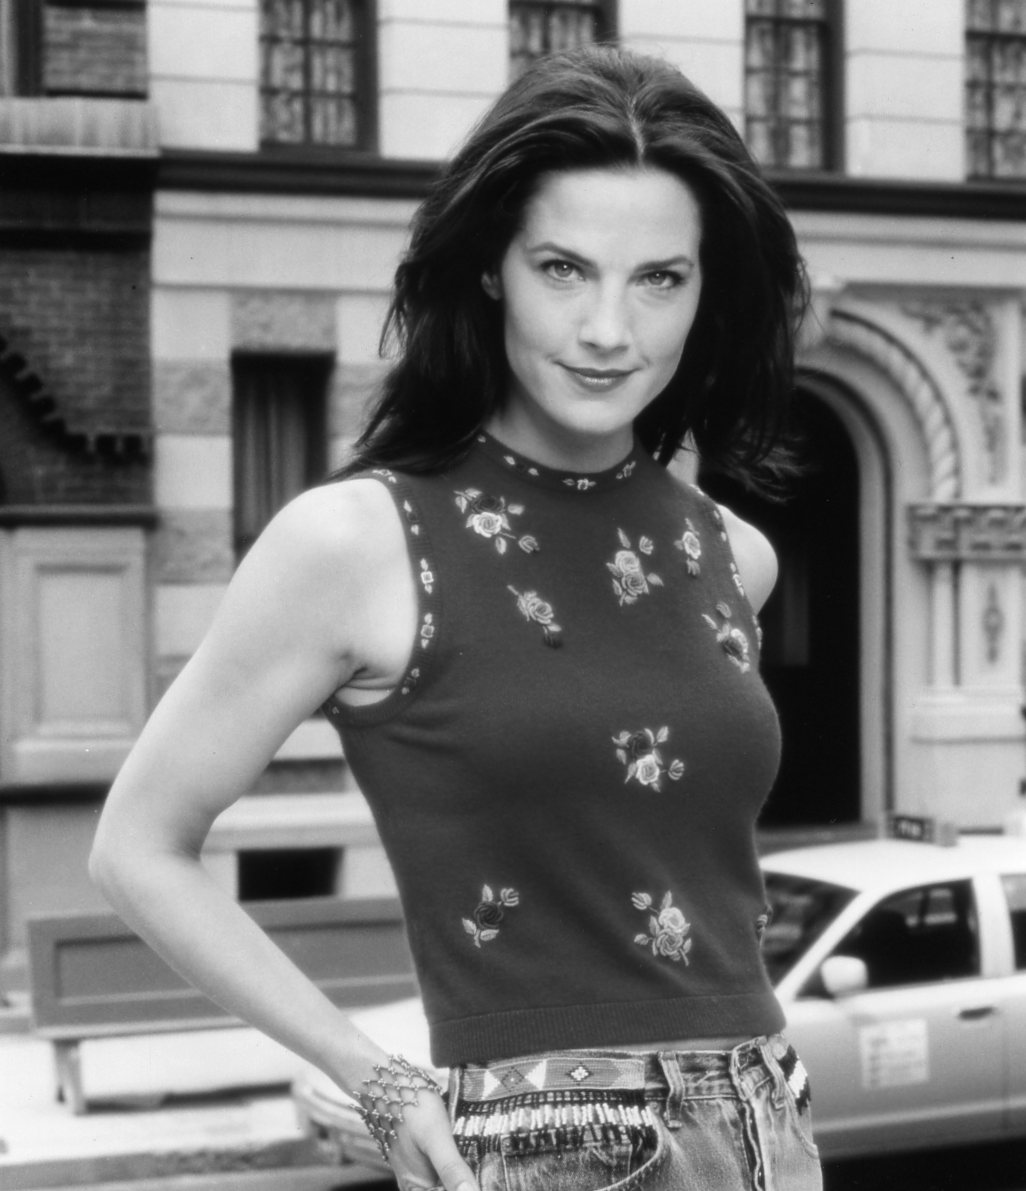 Terry Farrell leaked wallpapers